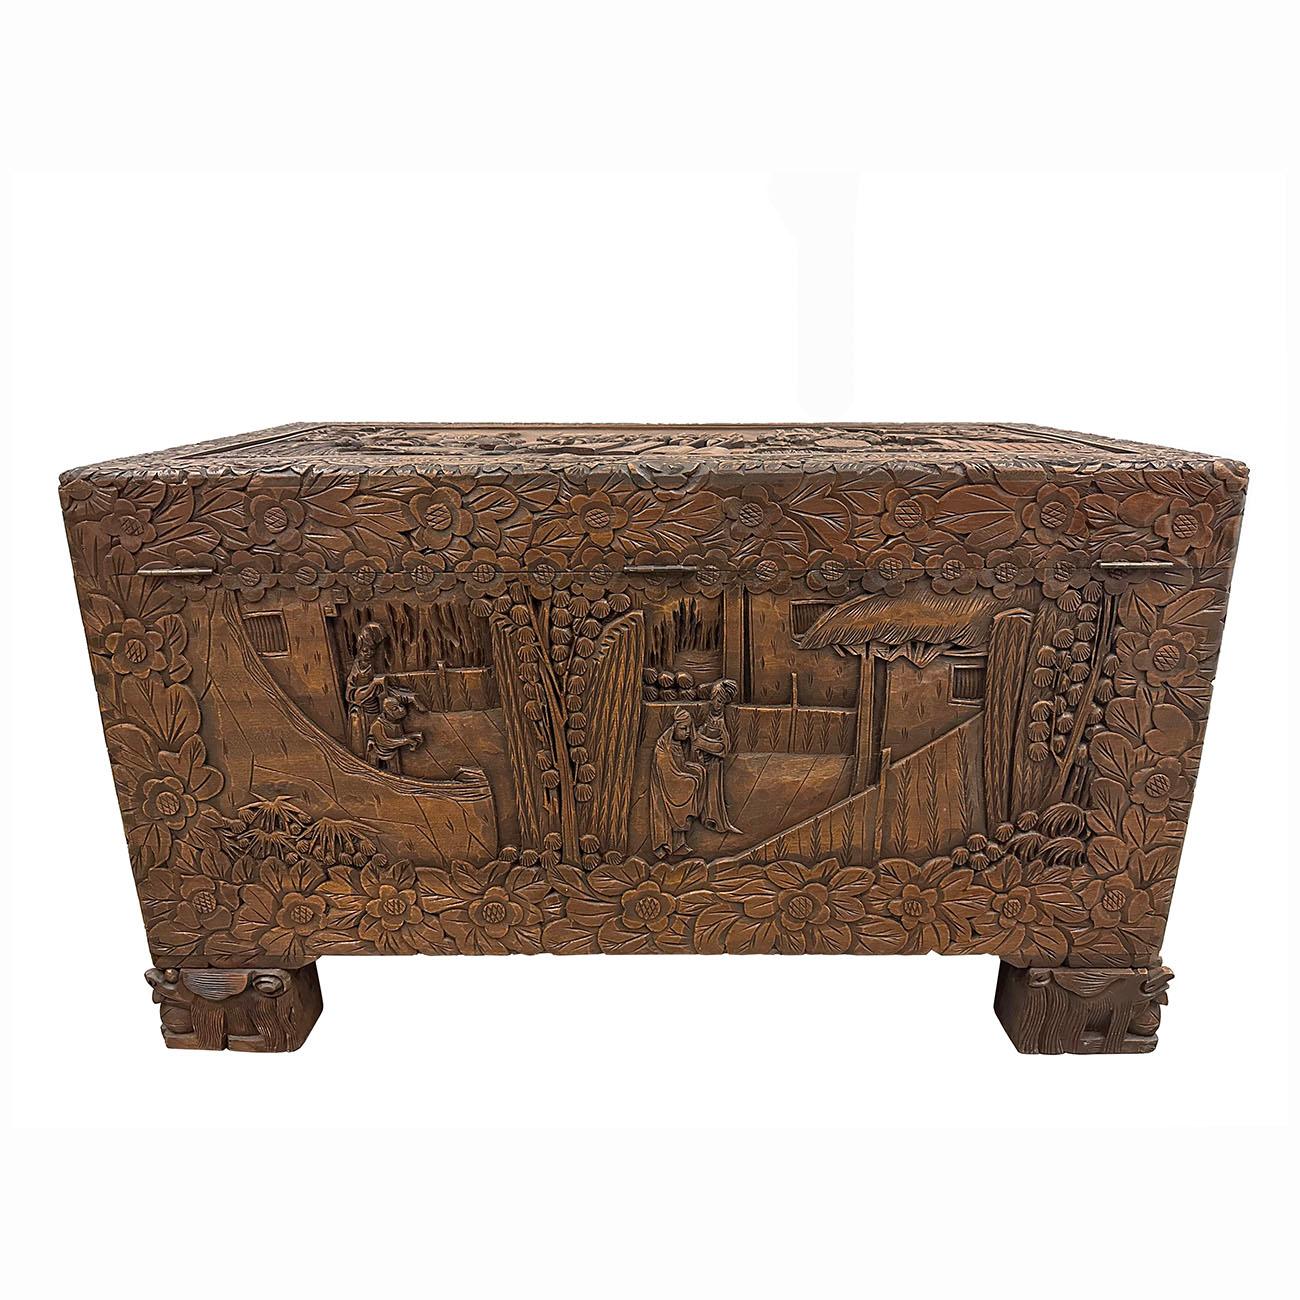 Early 20th Century Chinese Carved Camphor Wood Hope Chest For Sale 6